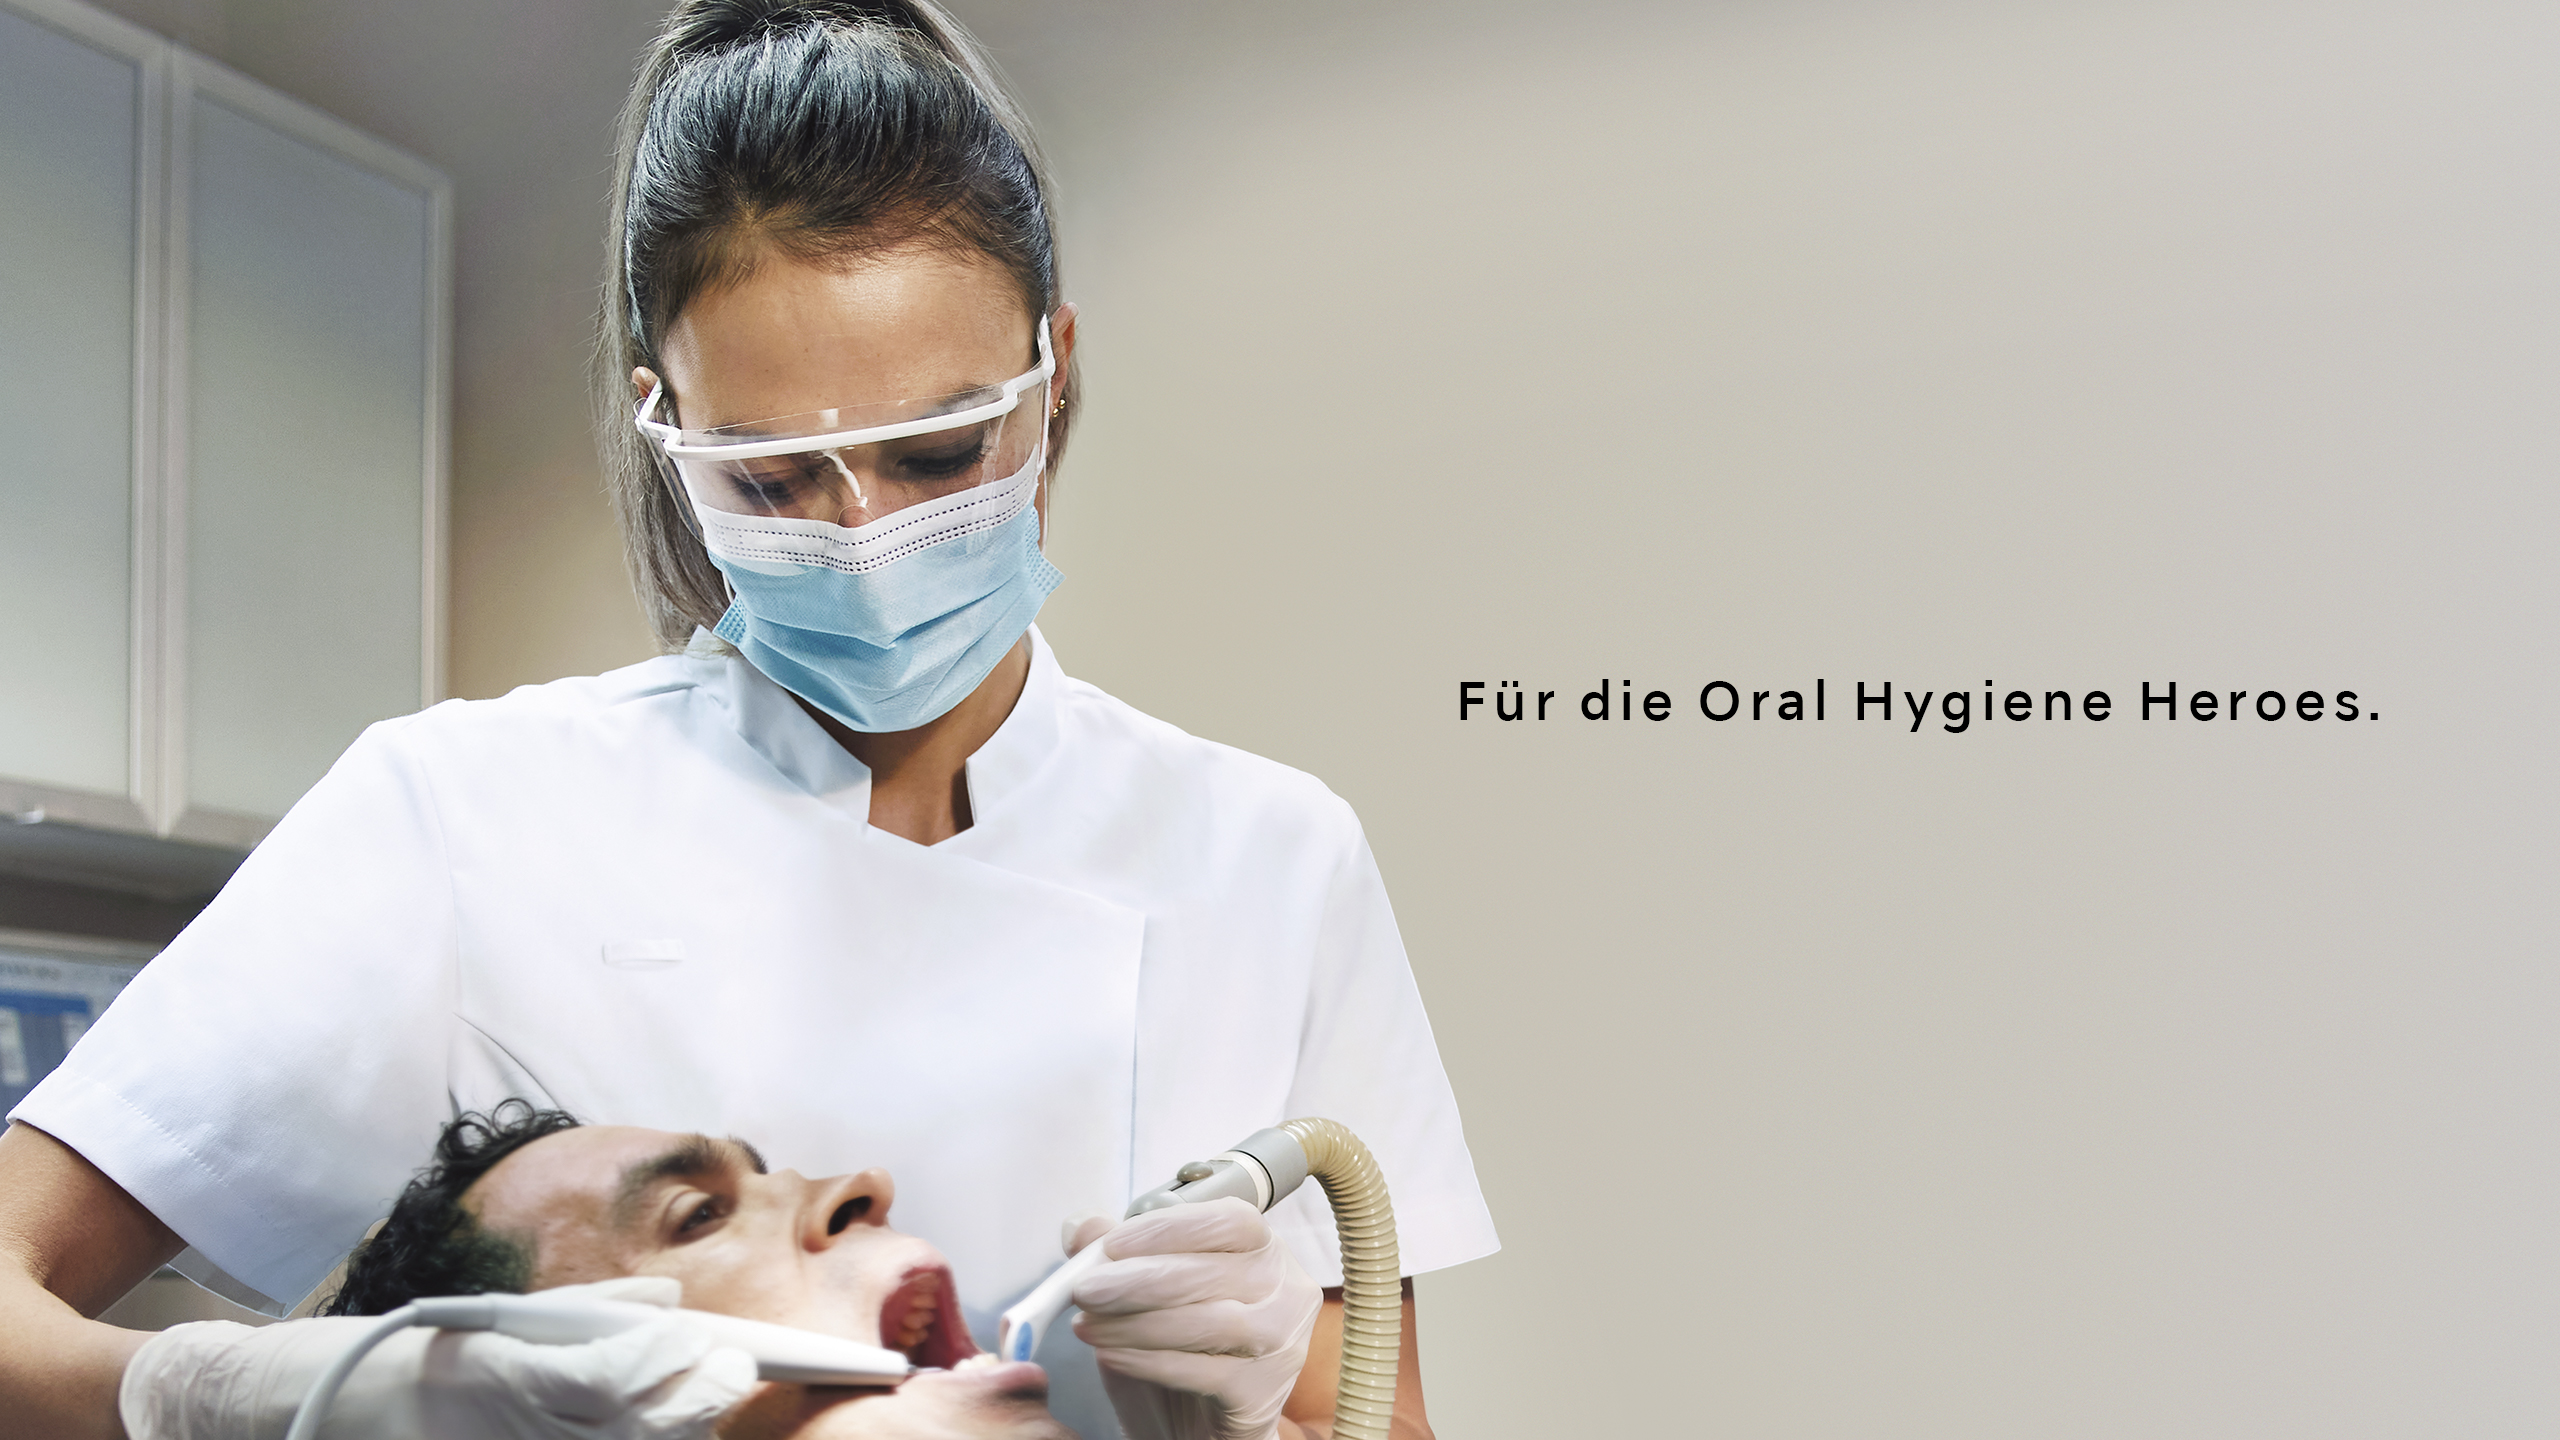 FOR THE ORAL HYGIENE HEROES